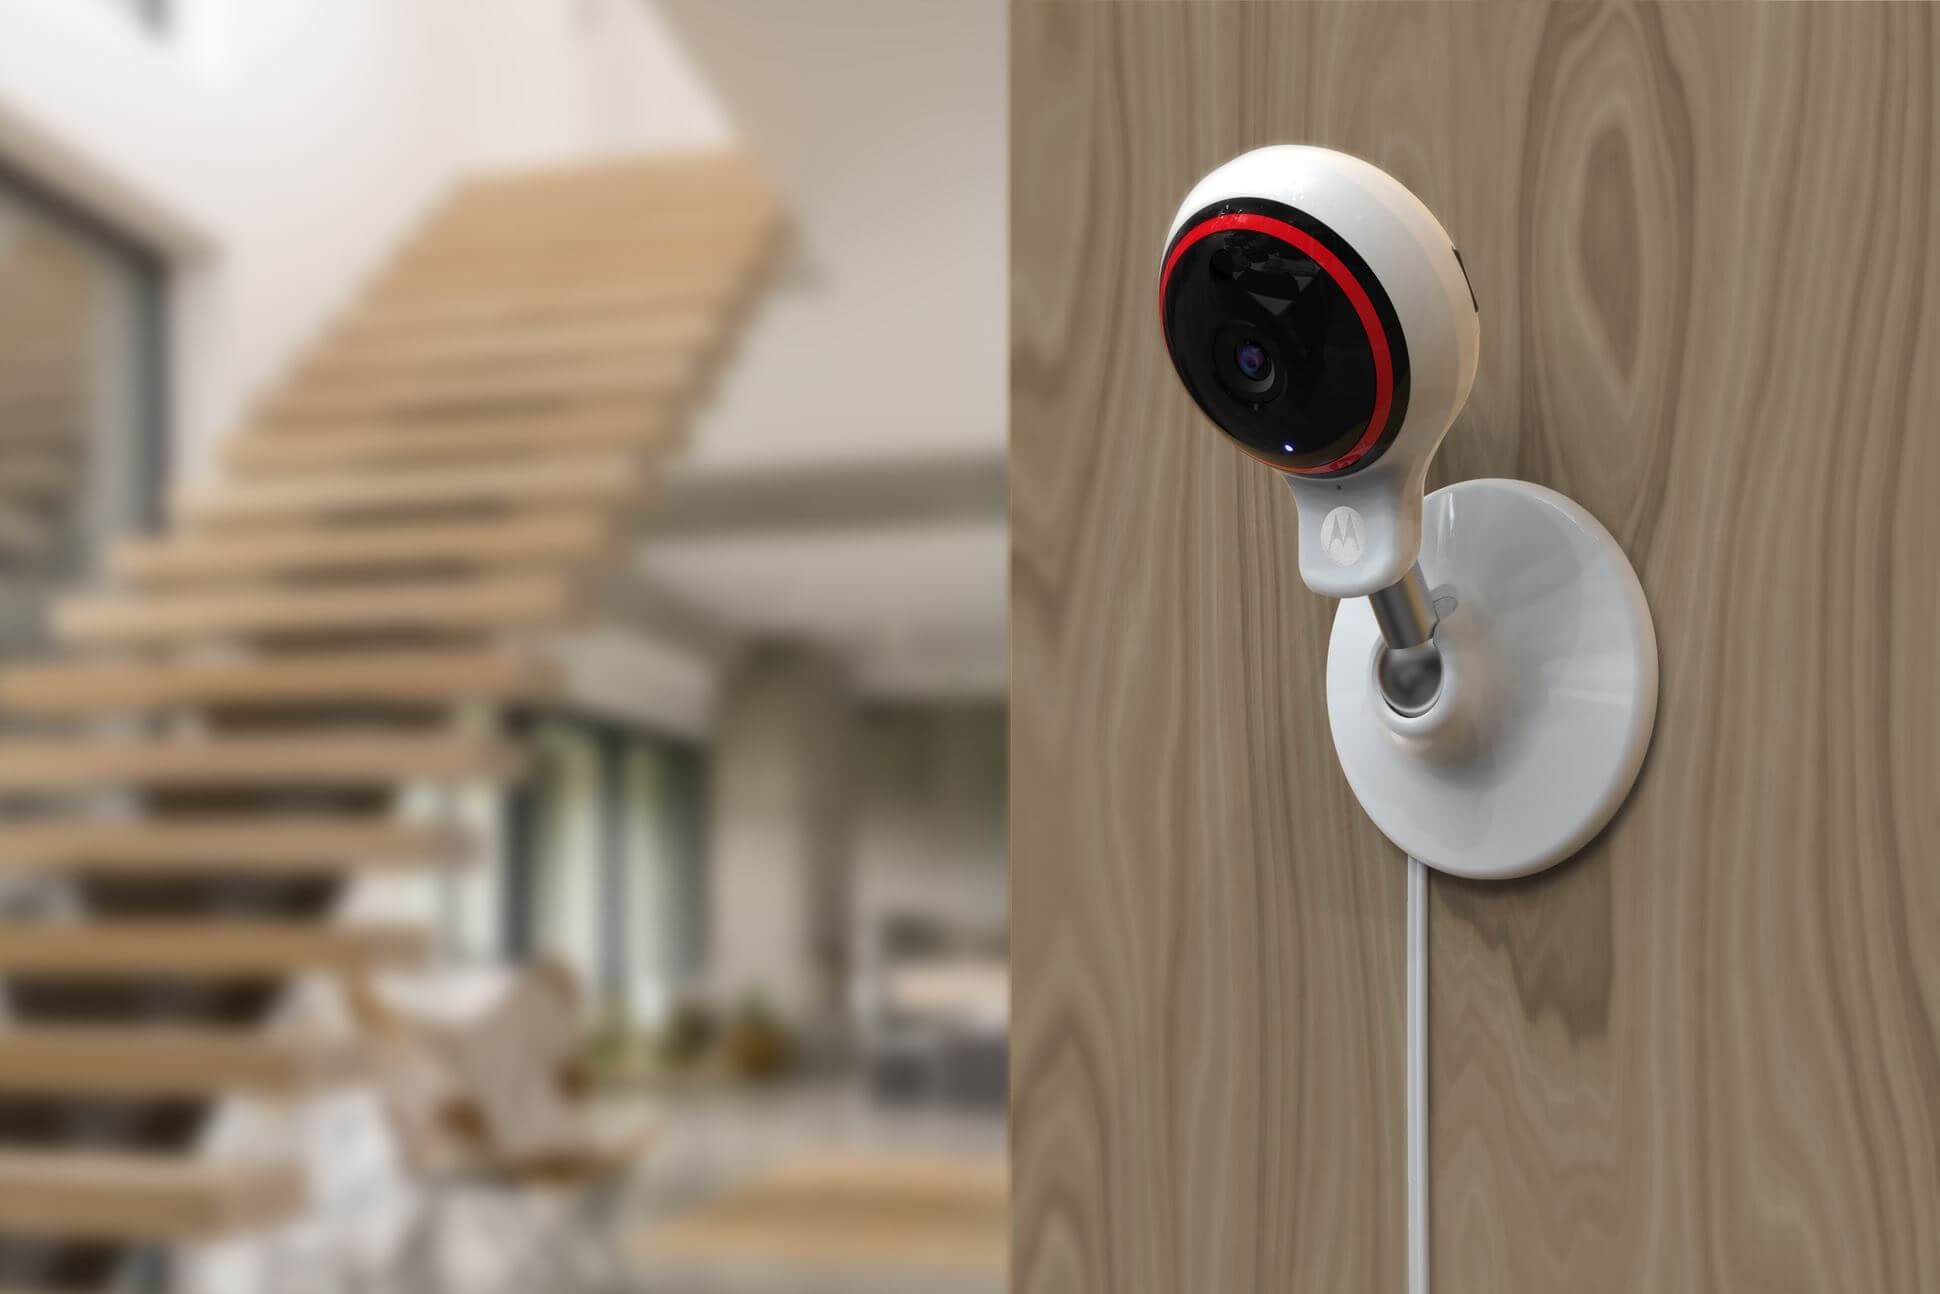 What Security Cameras are Good for Small Apartments?